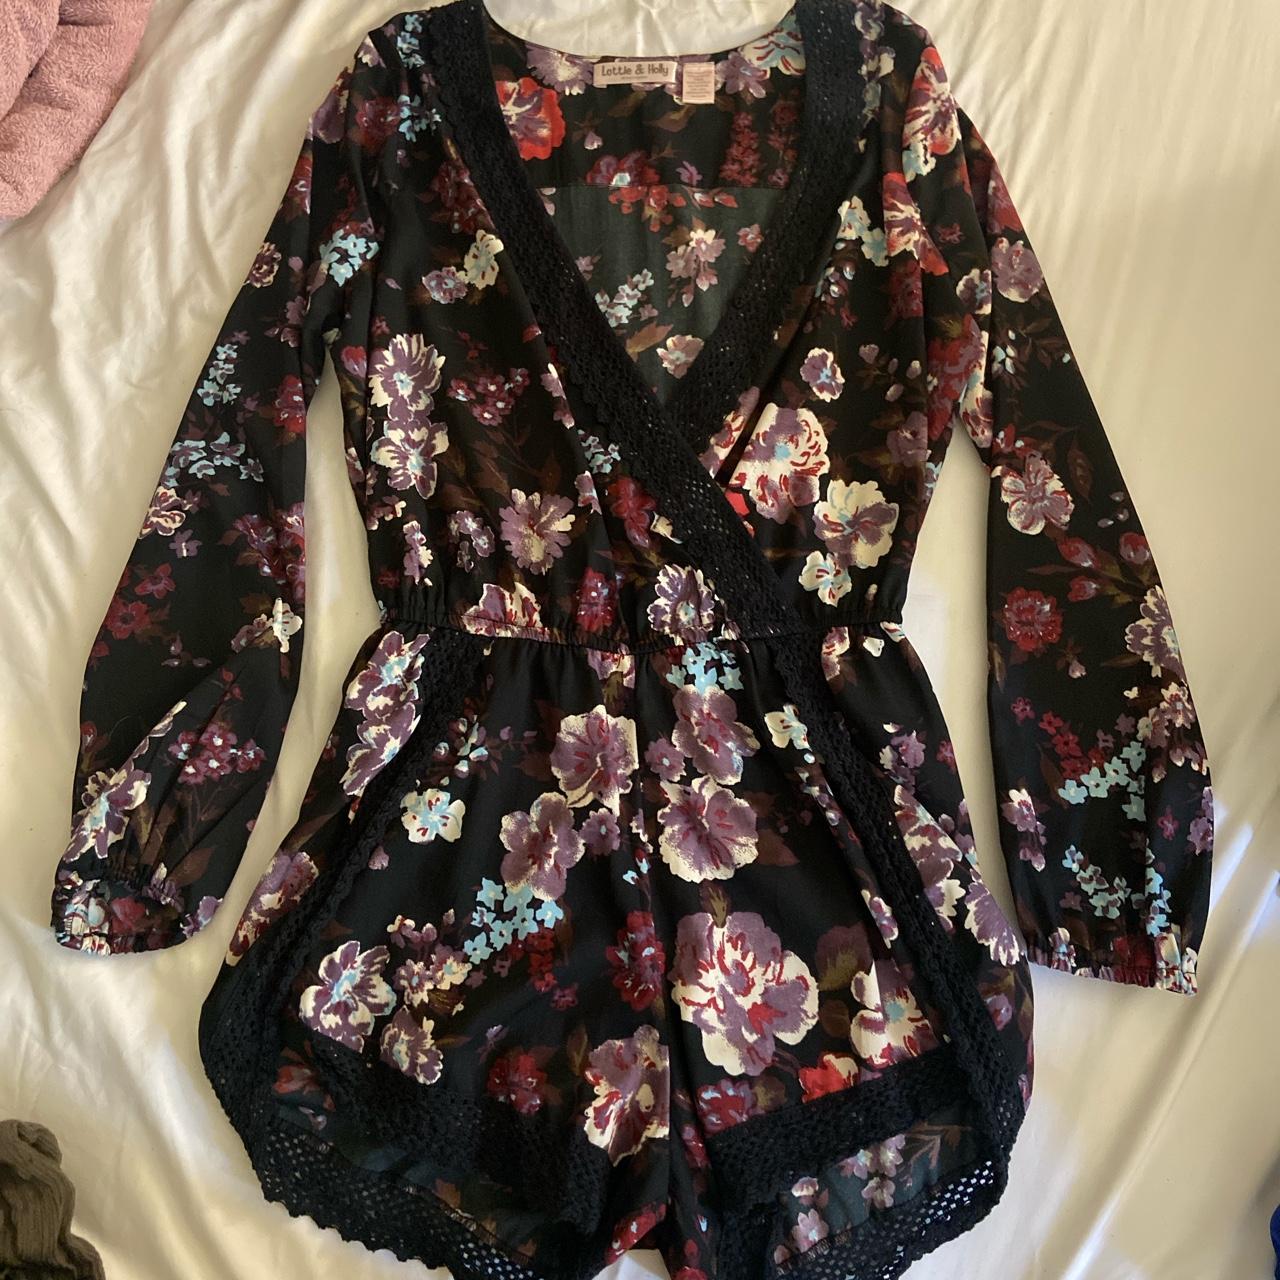 Product Image 1 - Romper from Tillys: only worn